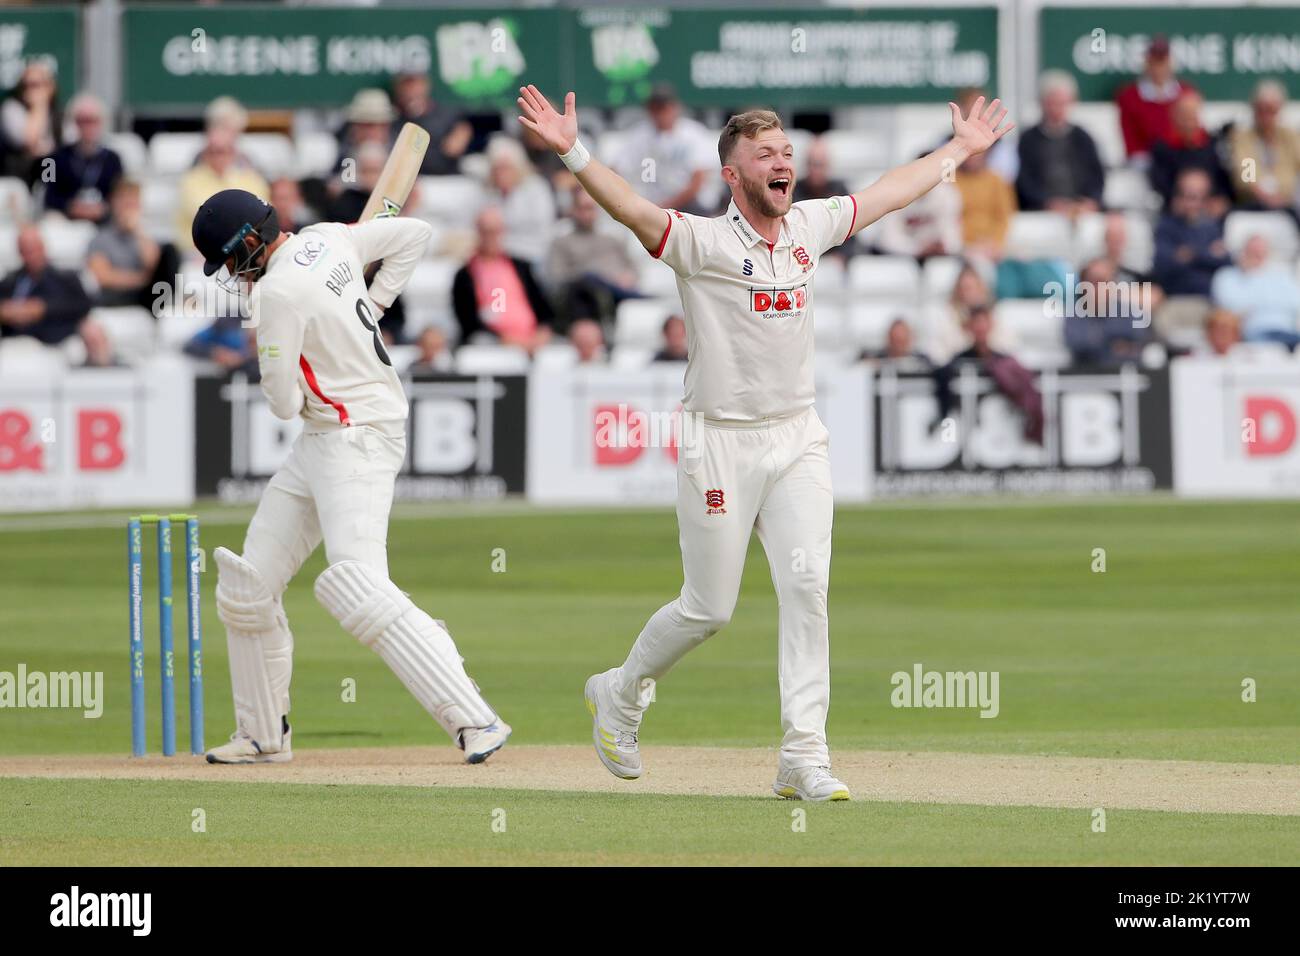 Sam Cook of Essex appeals for the wicket of Tom Bailey during Essex CCC vs Lancashire CCC, LV Insurance County Championship Division 1 Cricket at The Stock Photo